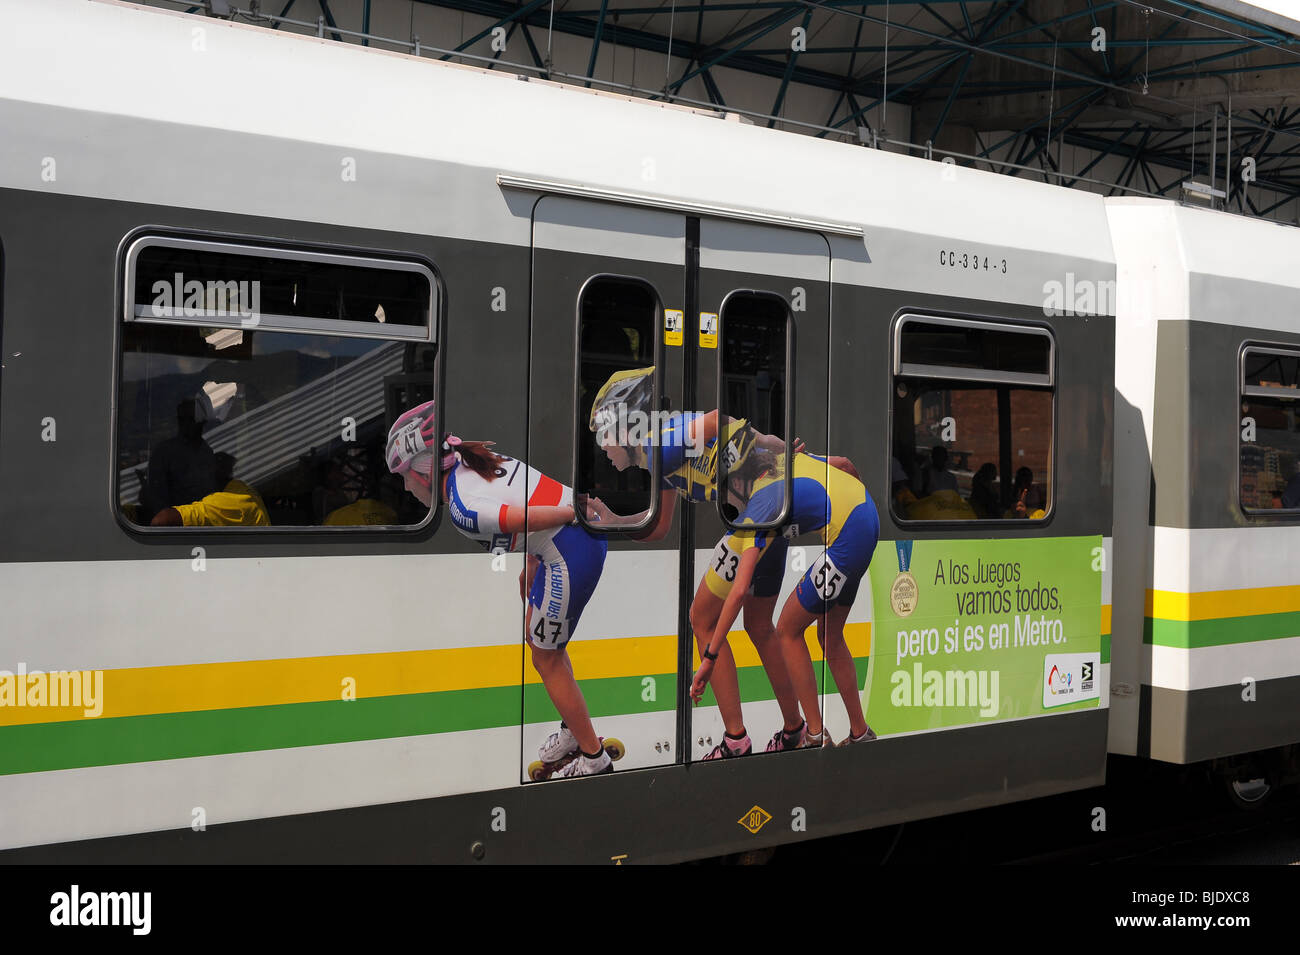 Metro with painted pictures of 3 young women athletes to promote the 2010 South American Games in Medellin. Stock Photo